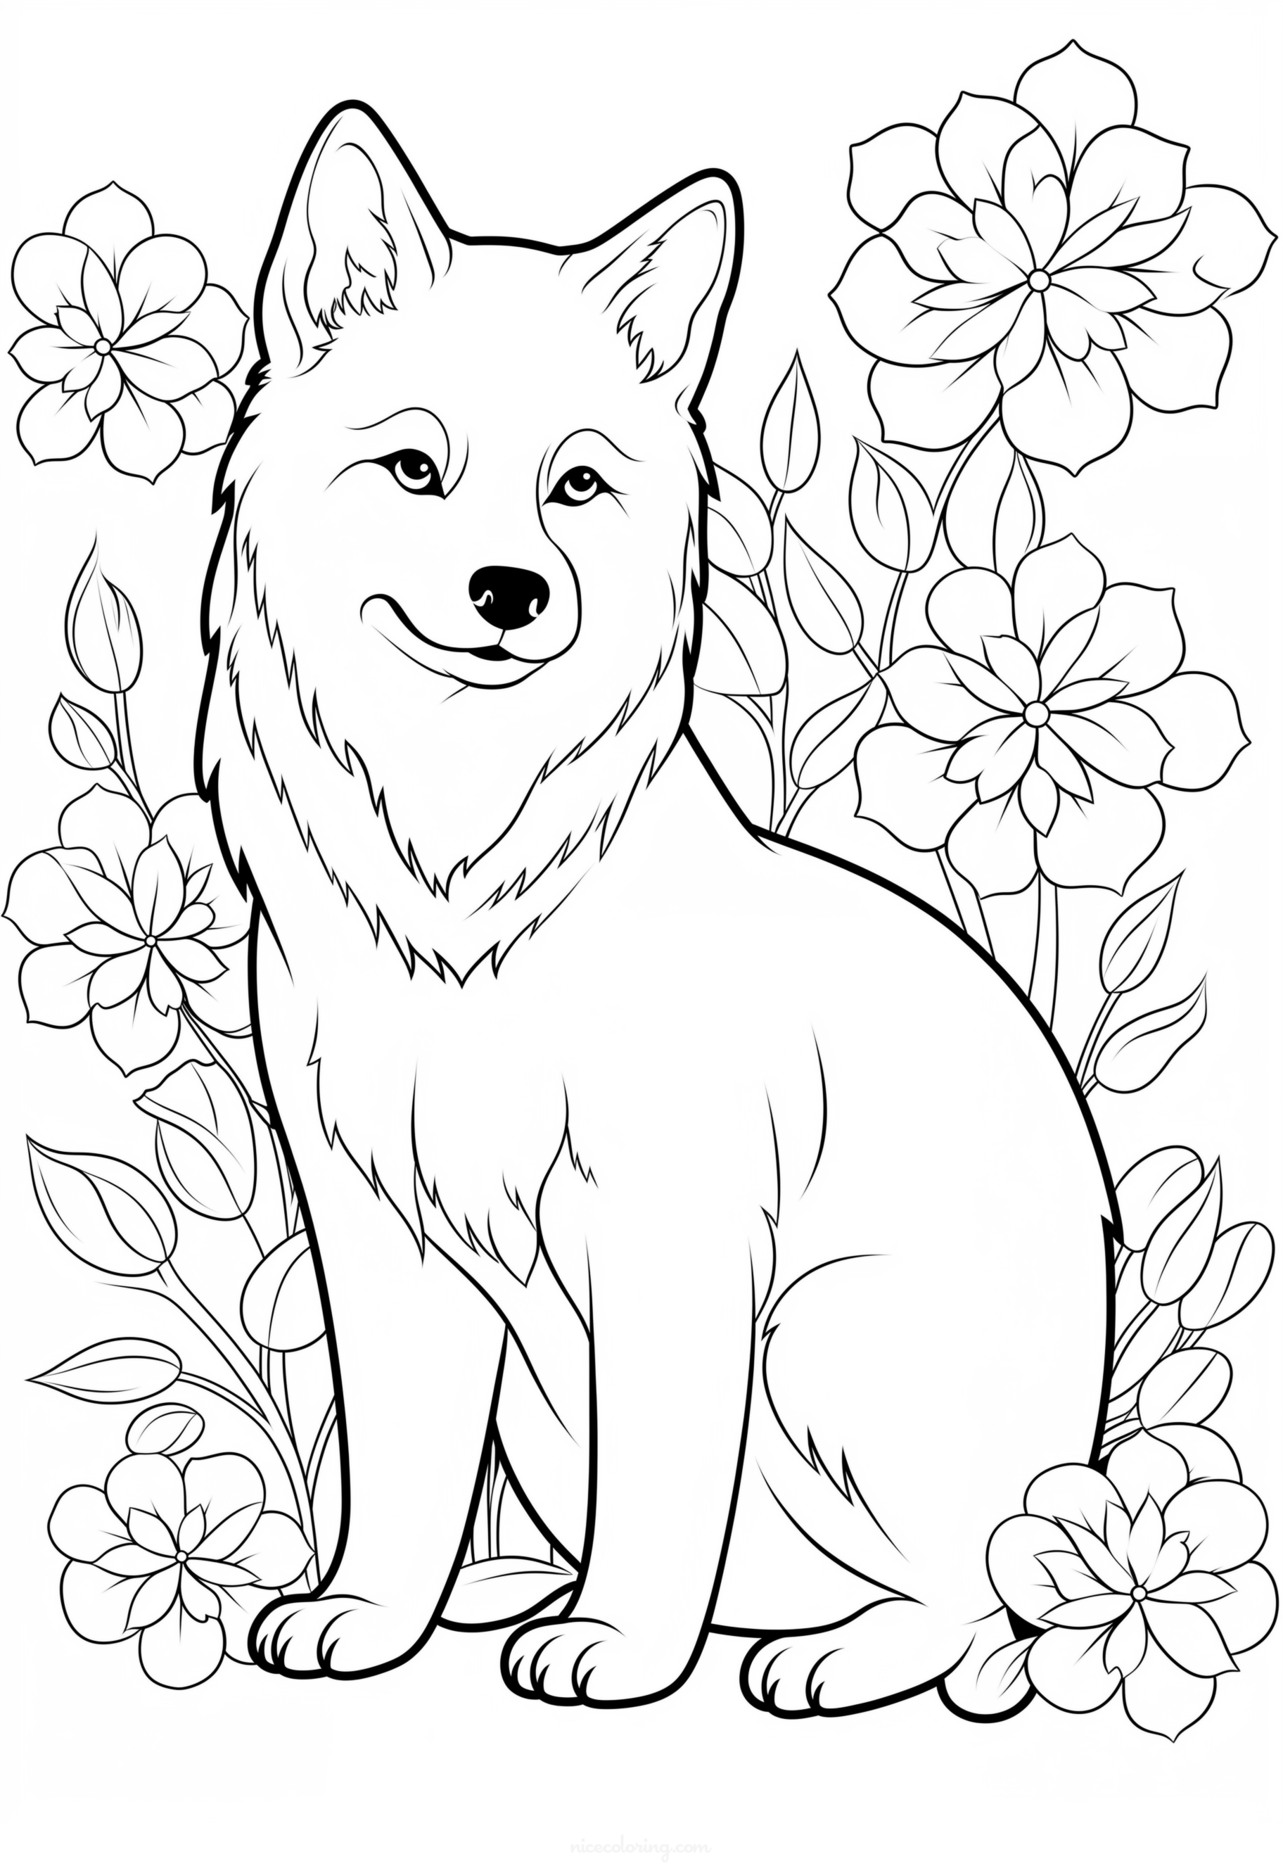 Cute dog playing outside coloring page